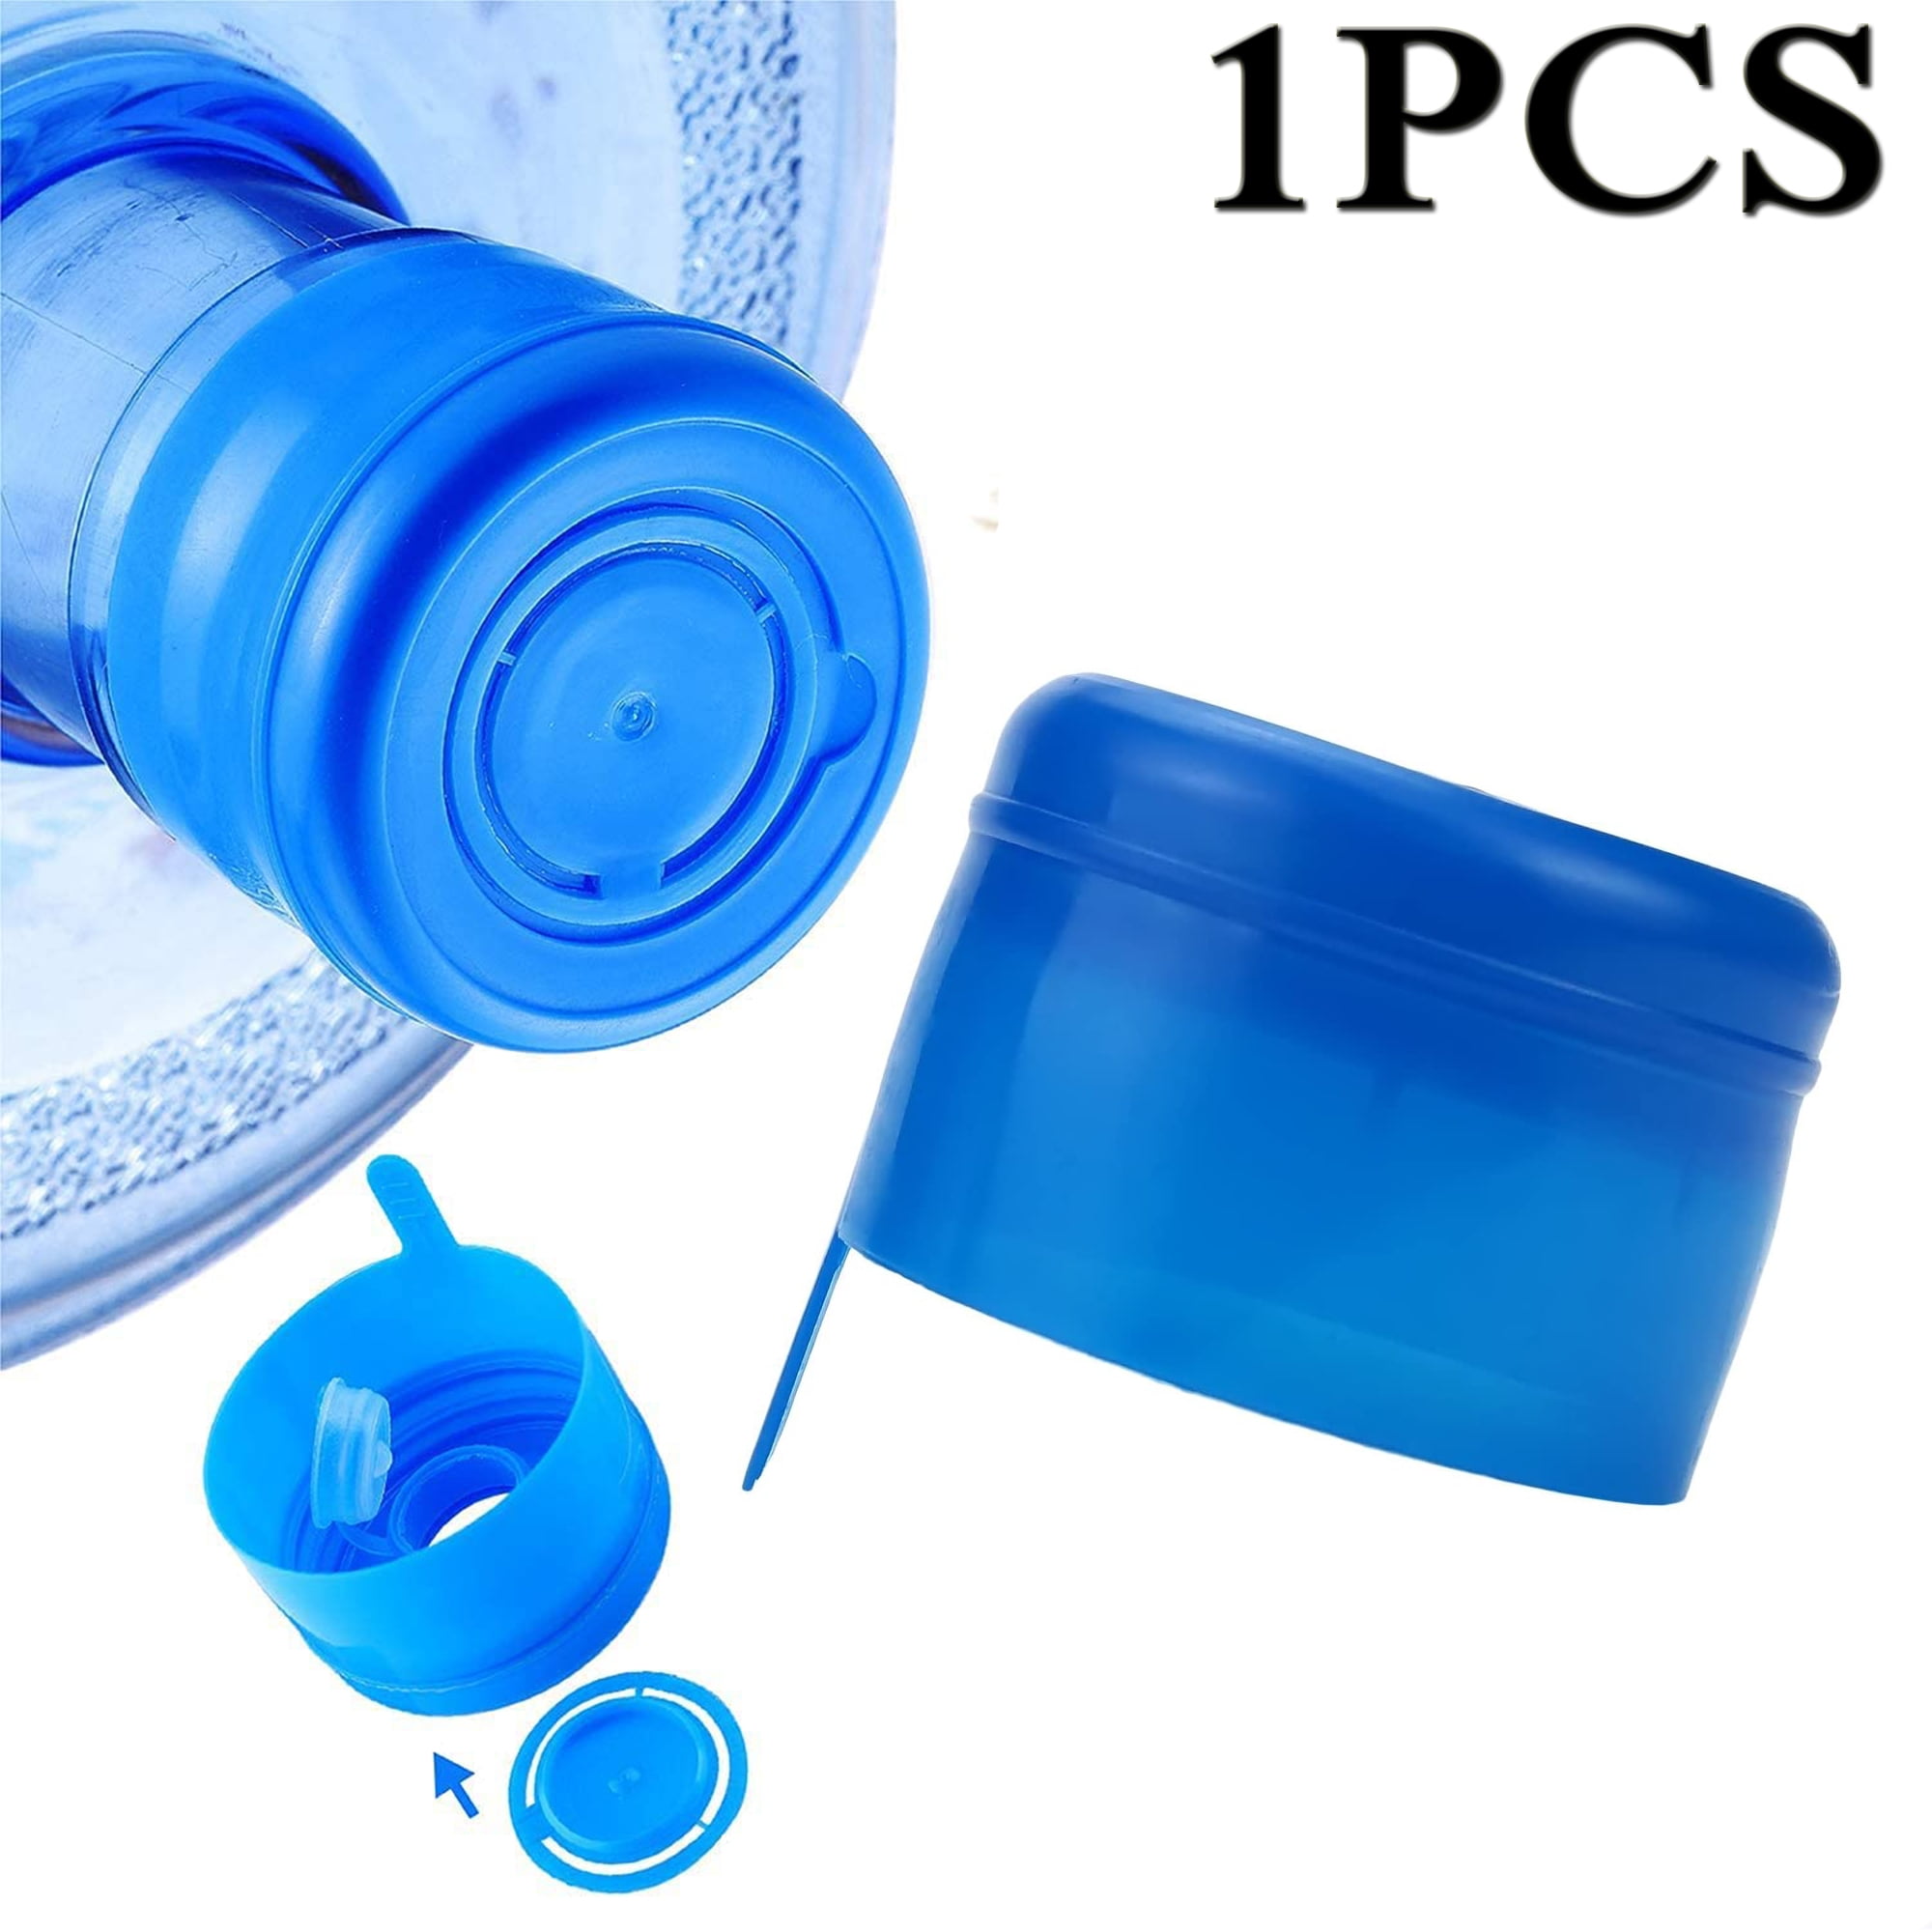 5Pcs reusable water bottle snap on cap replacement for 55mm 3-5 gallon water'TPI 